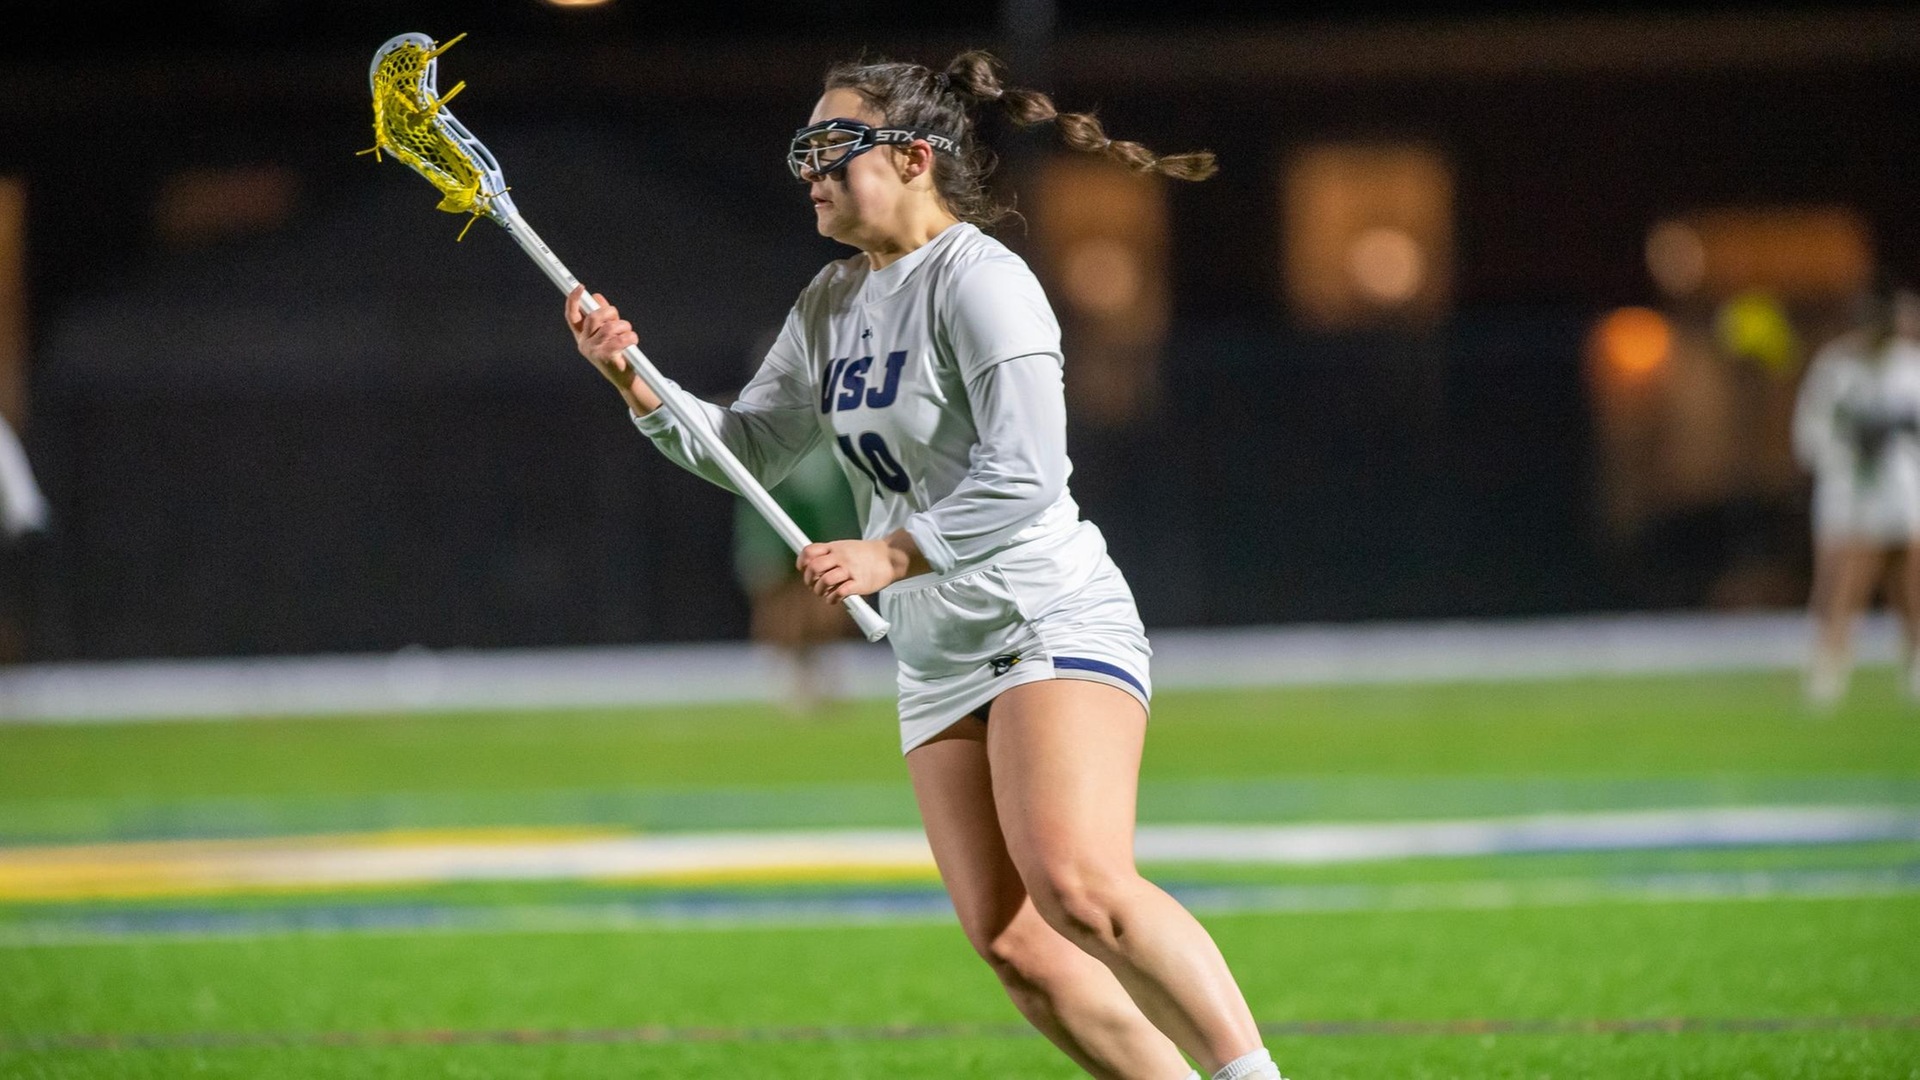 Women's Lacrosse Cruises Past Mitchell on the Road Wednesday, 20-2